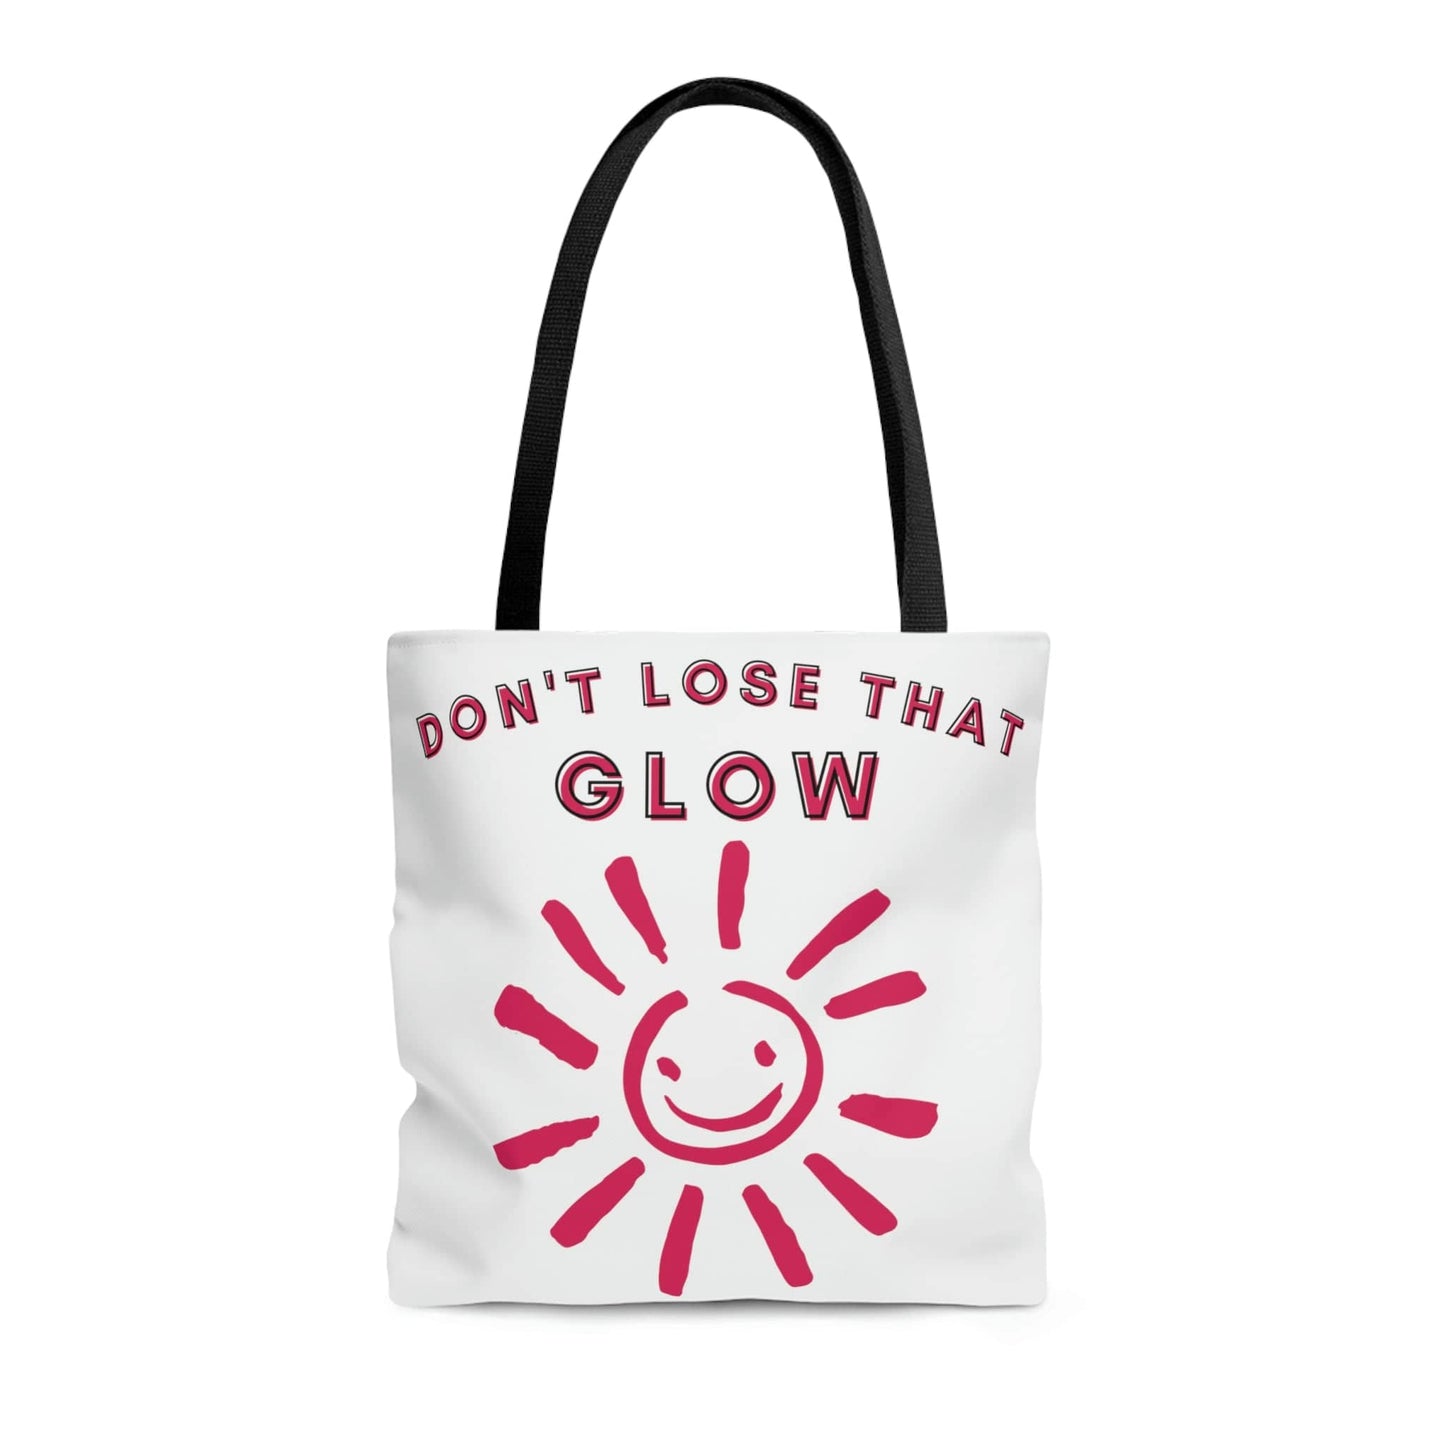 Don't Lose That Glow (Graphic Red Smiling Sun) Tote Bag